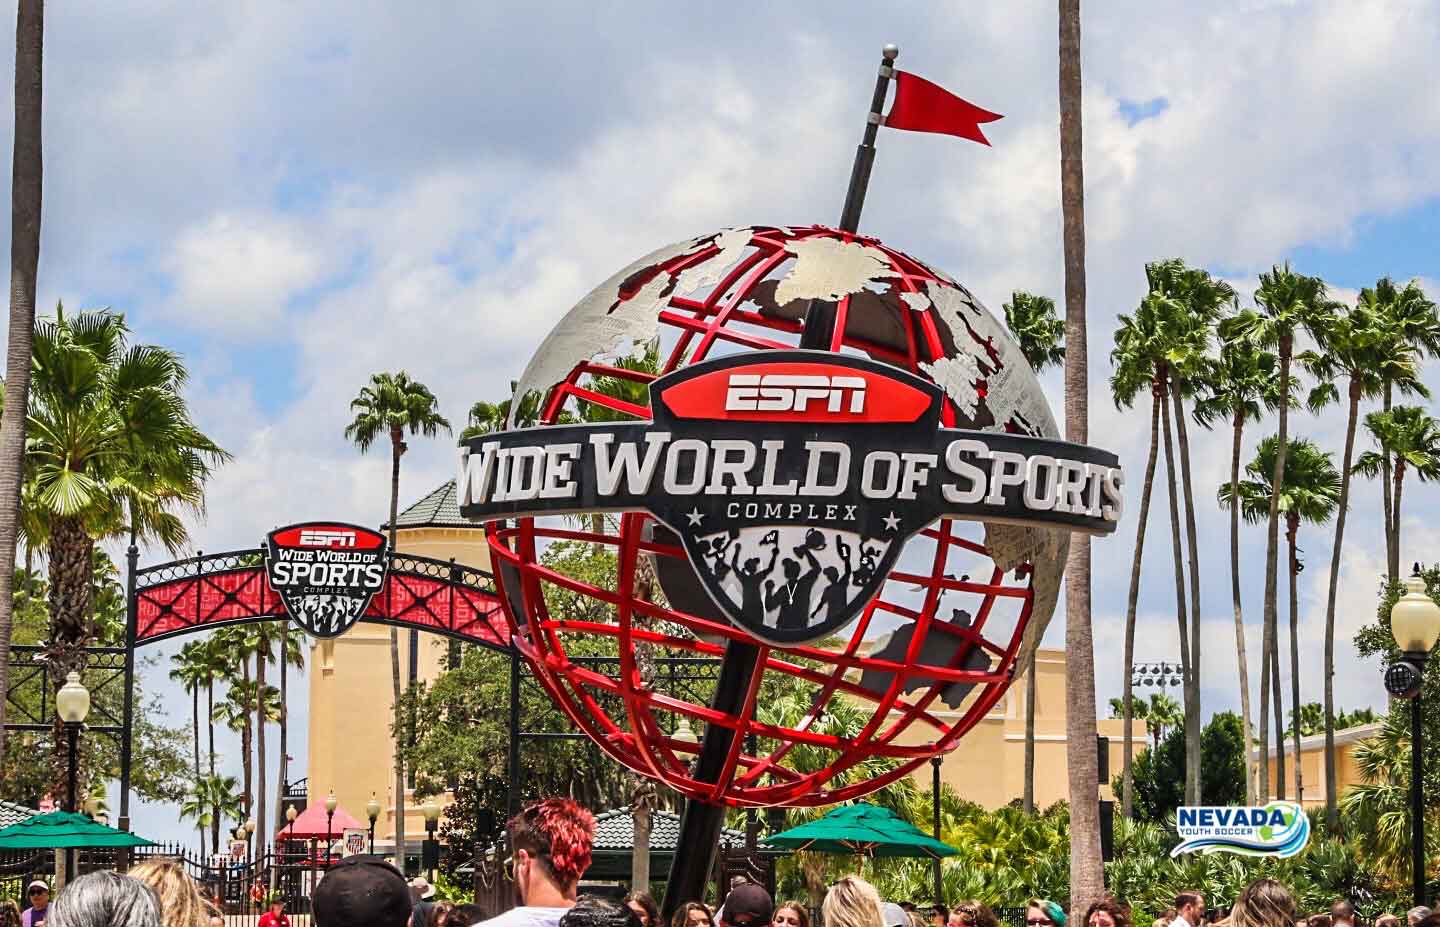 espn wide world of sports complex sign on a metal sphere